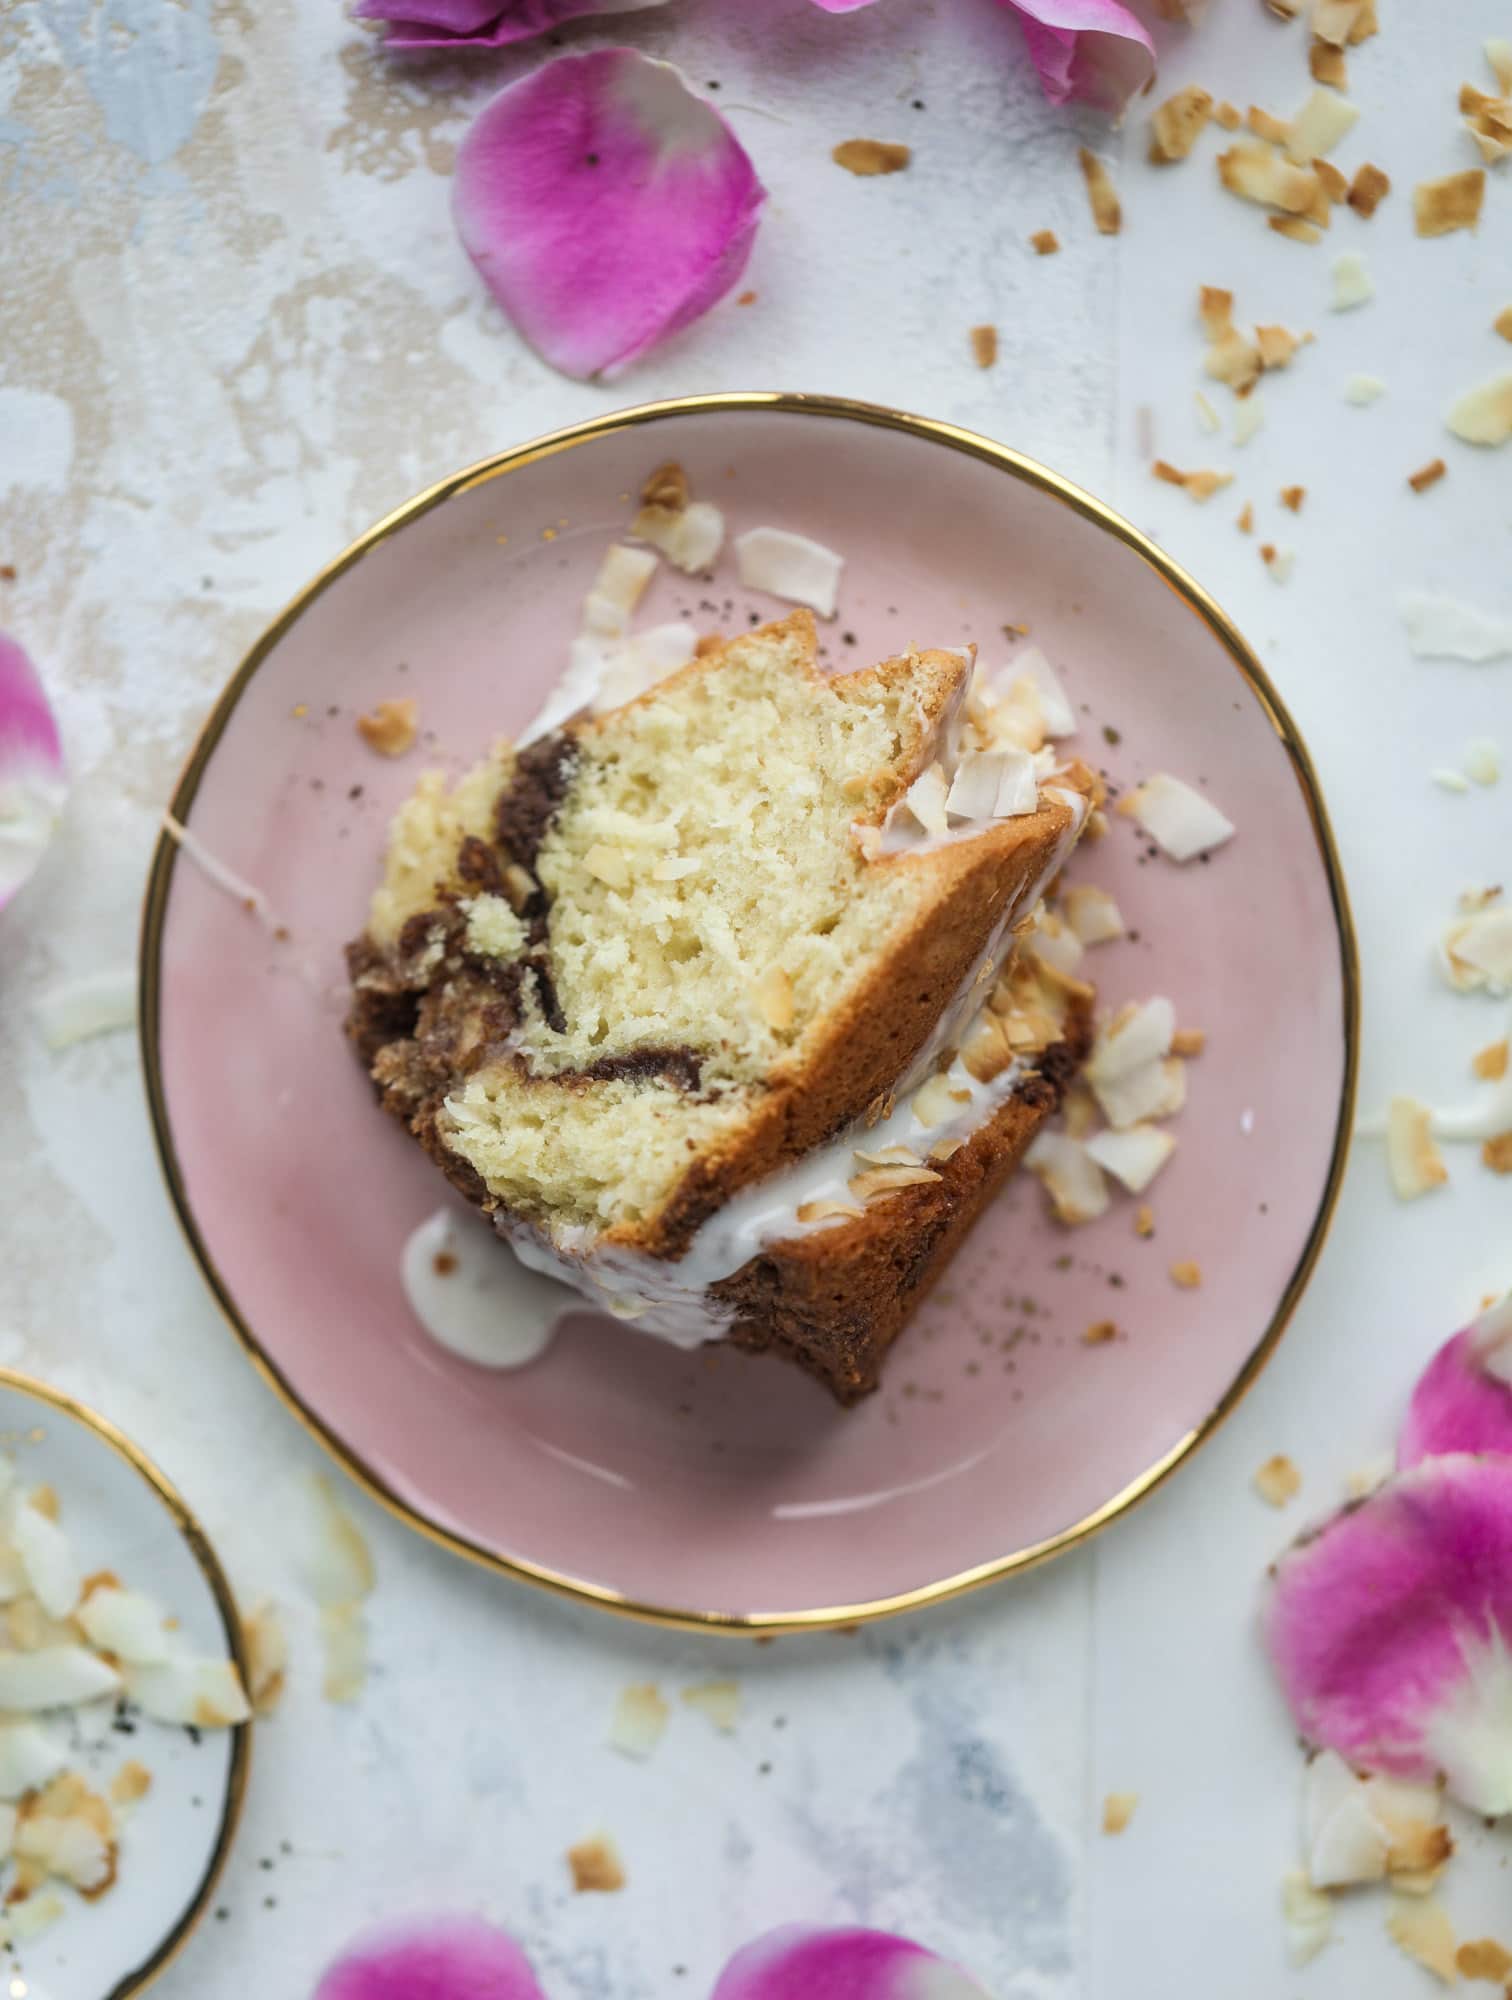 Make breakfast and brunch better with coconut coffee cake! Tender coconut cake with a cocoa sugar streusel and a coconut glaze. To die for!